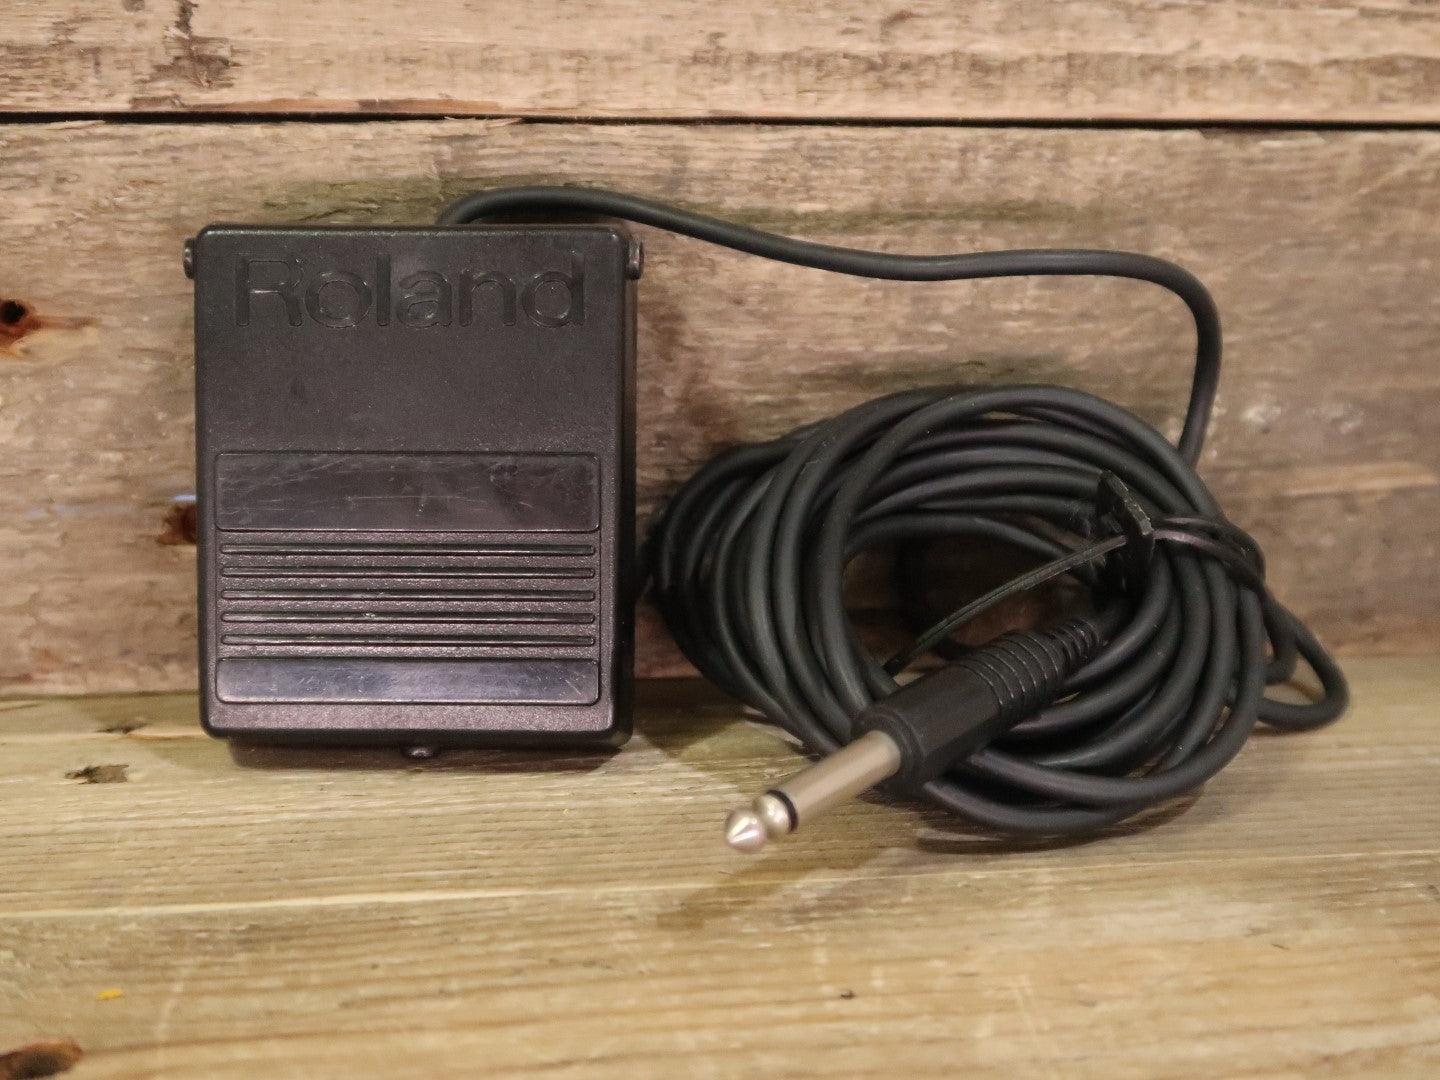 Roland Momentary Foot Switch